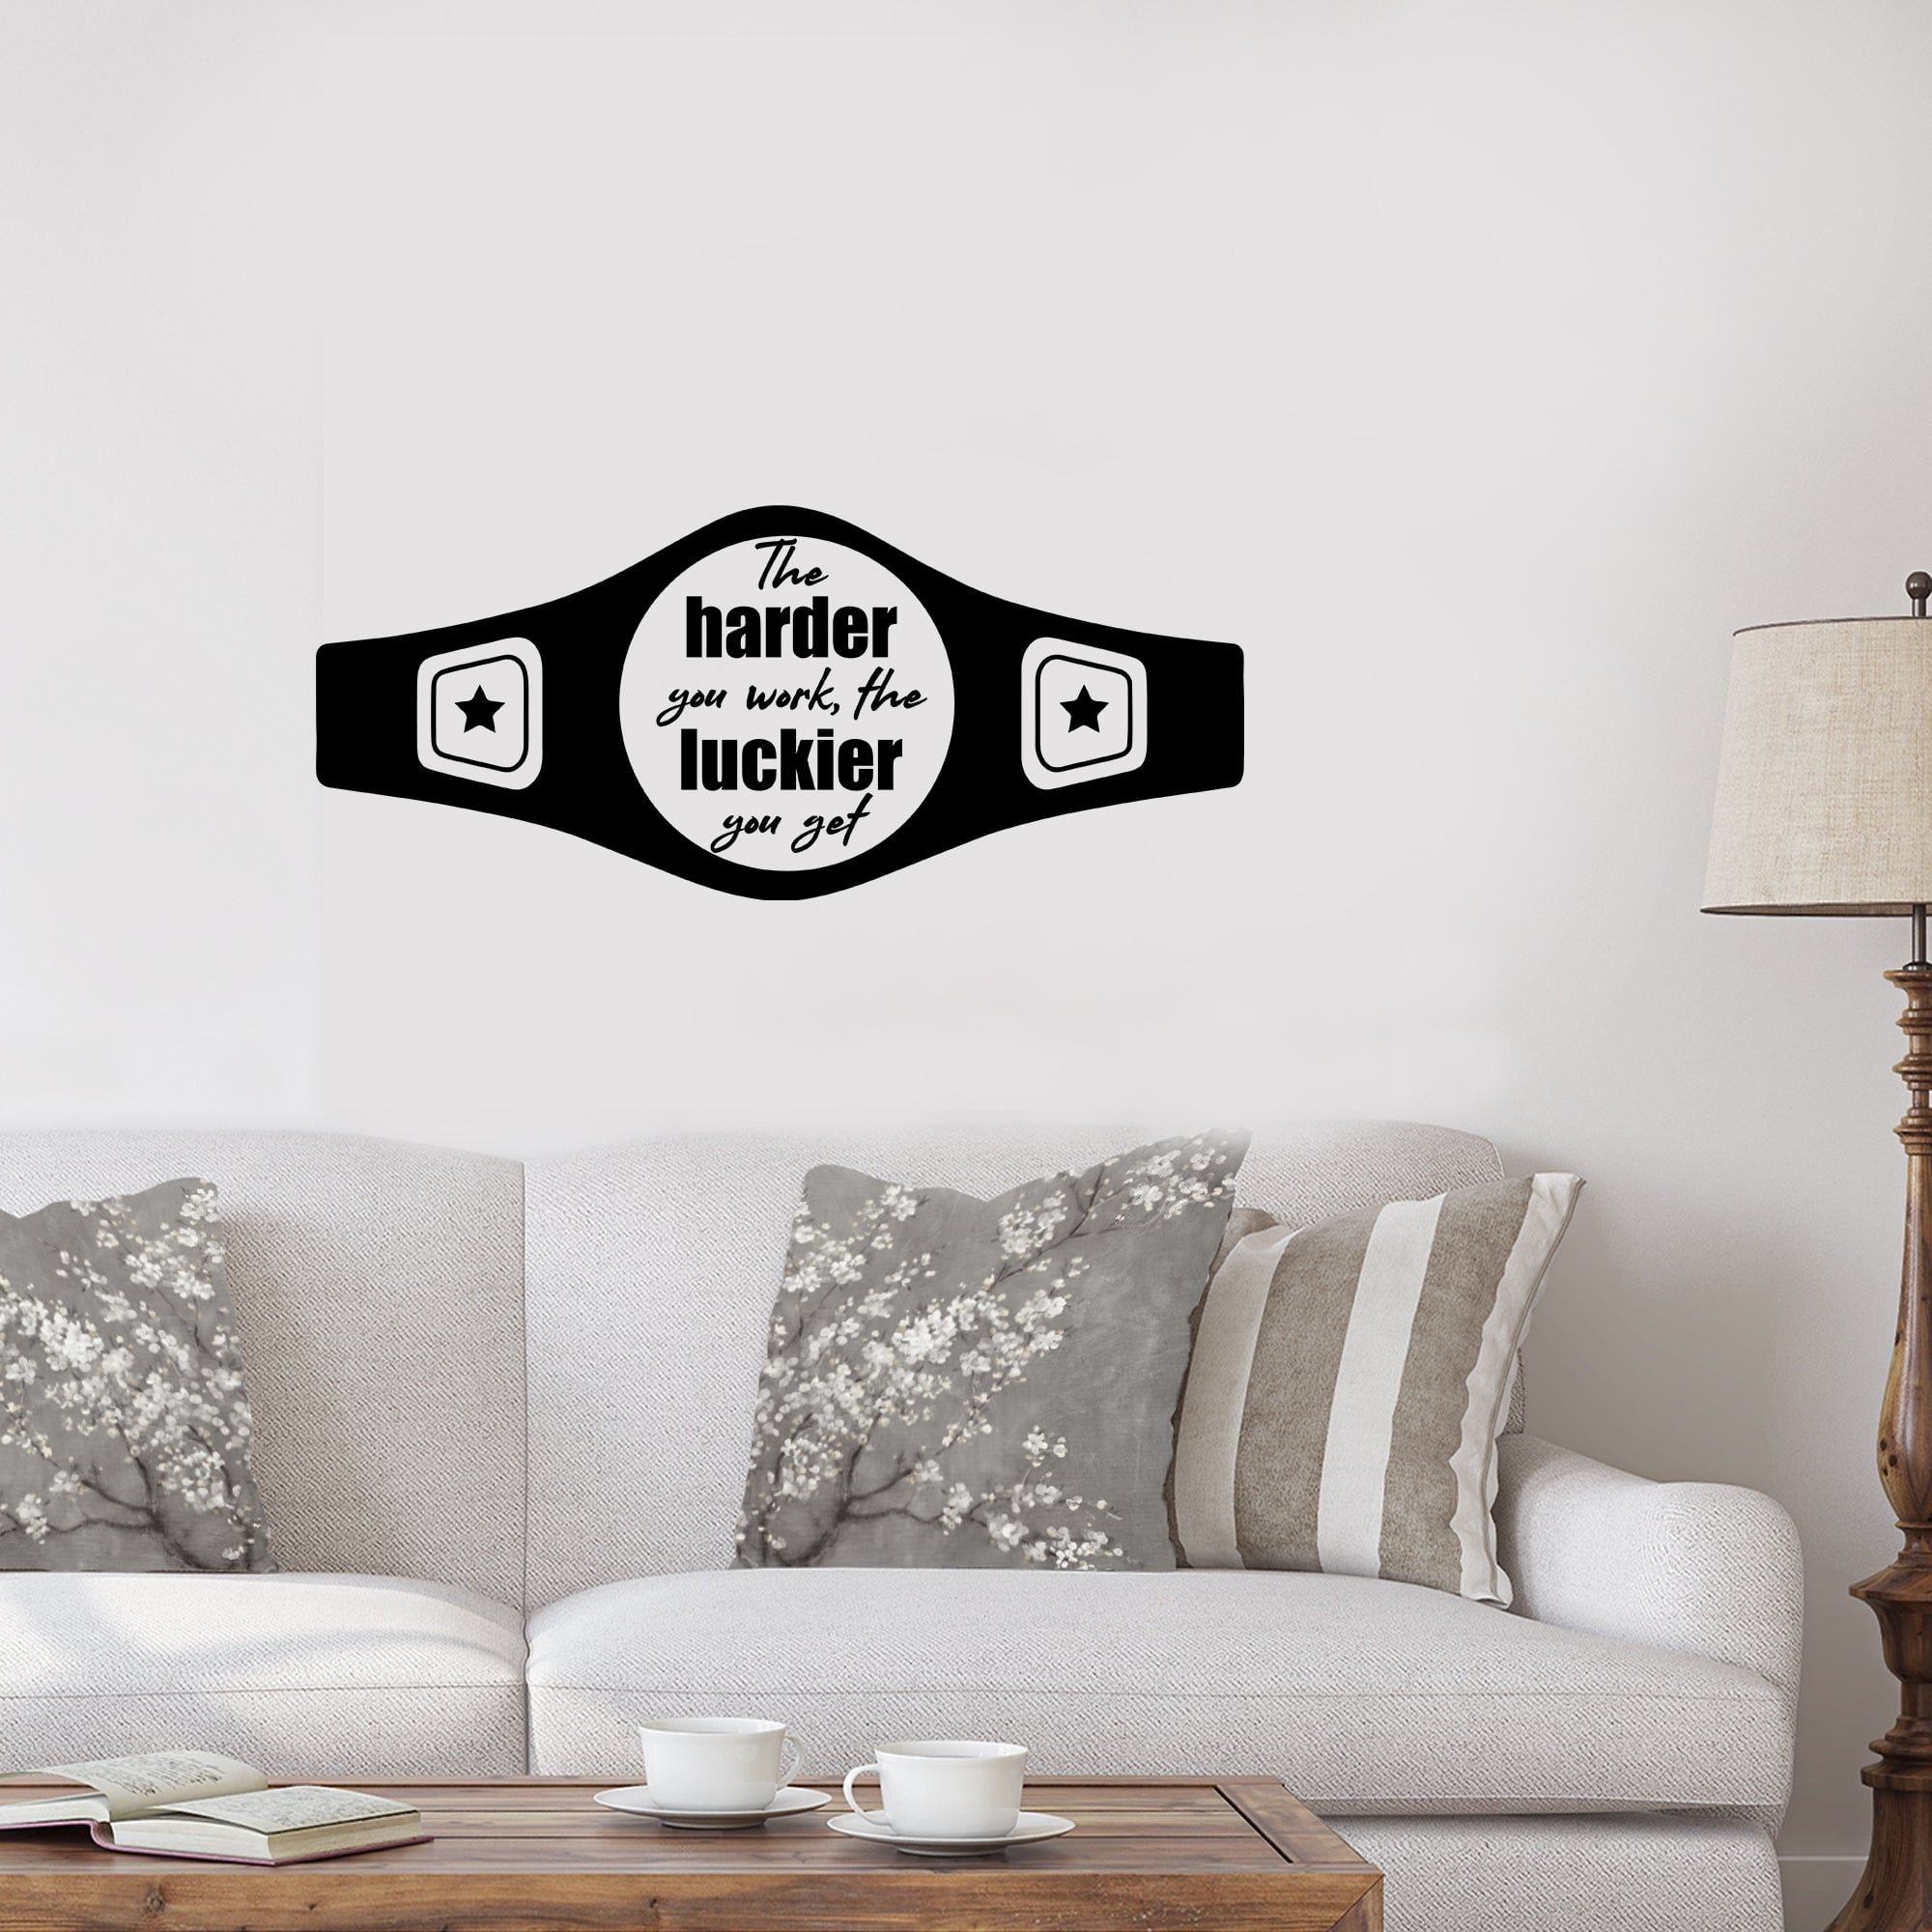 Motivational Decal Wall Sticker The Harder You Work The Better You Get